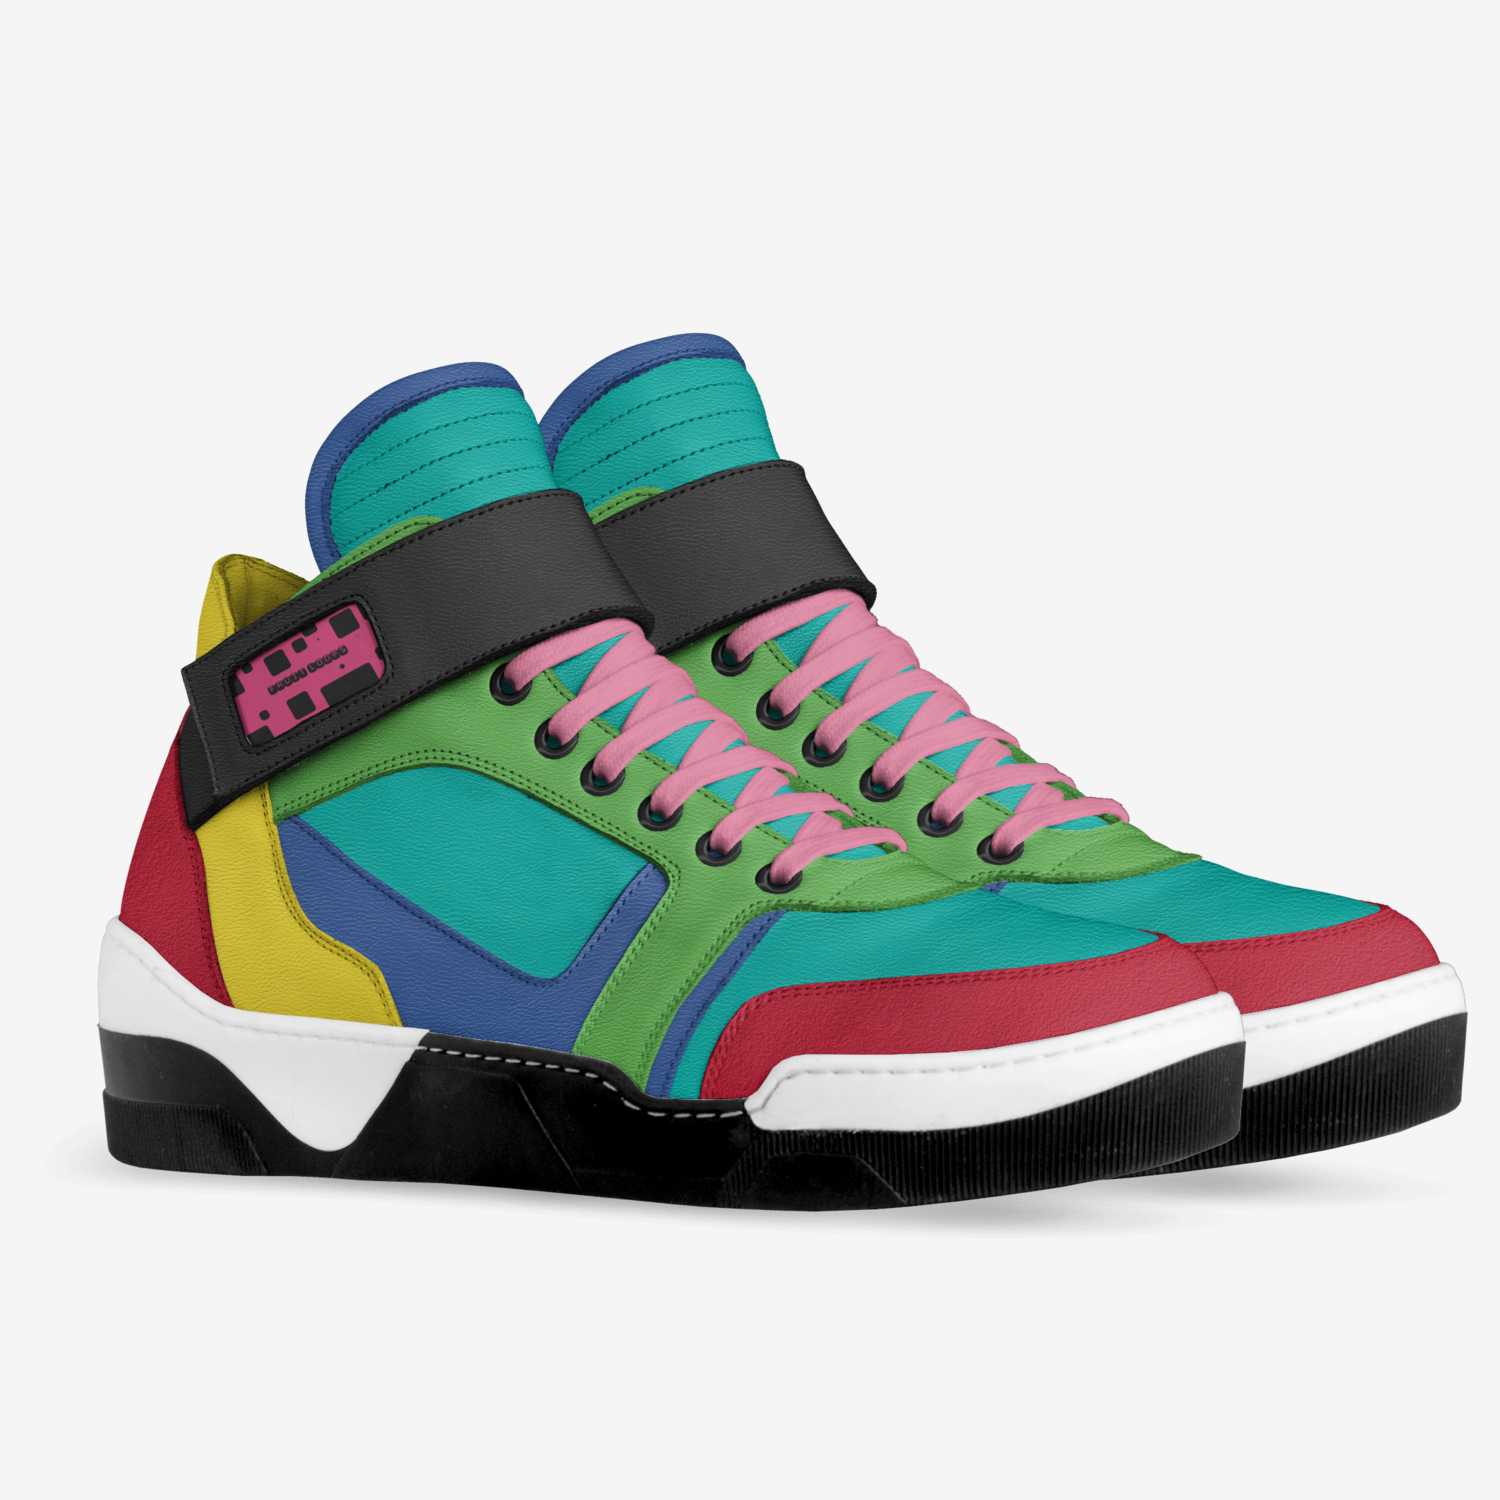 Fruit loops | A Custom Shoe concept by Vindy Irving